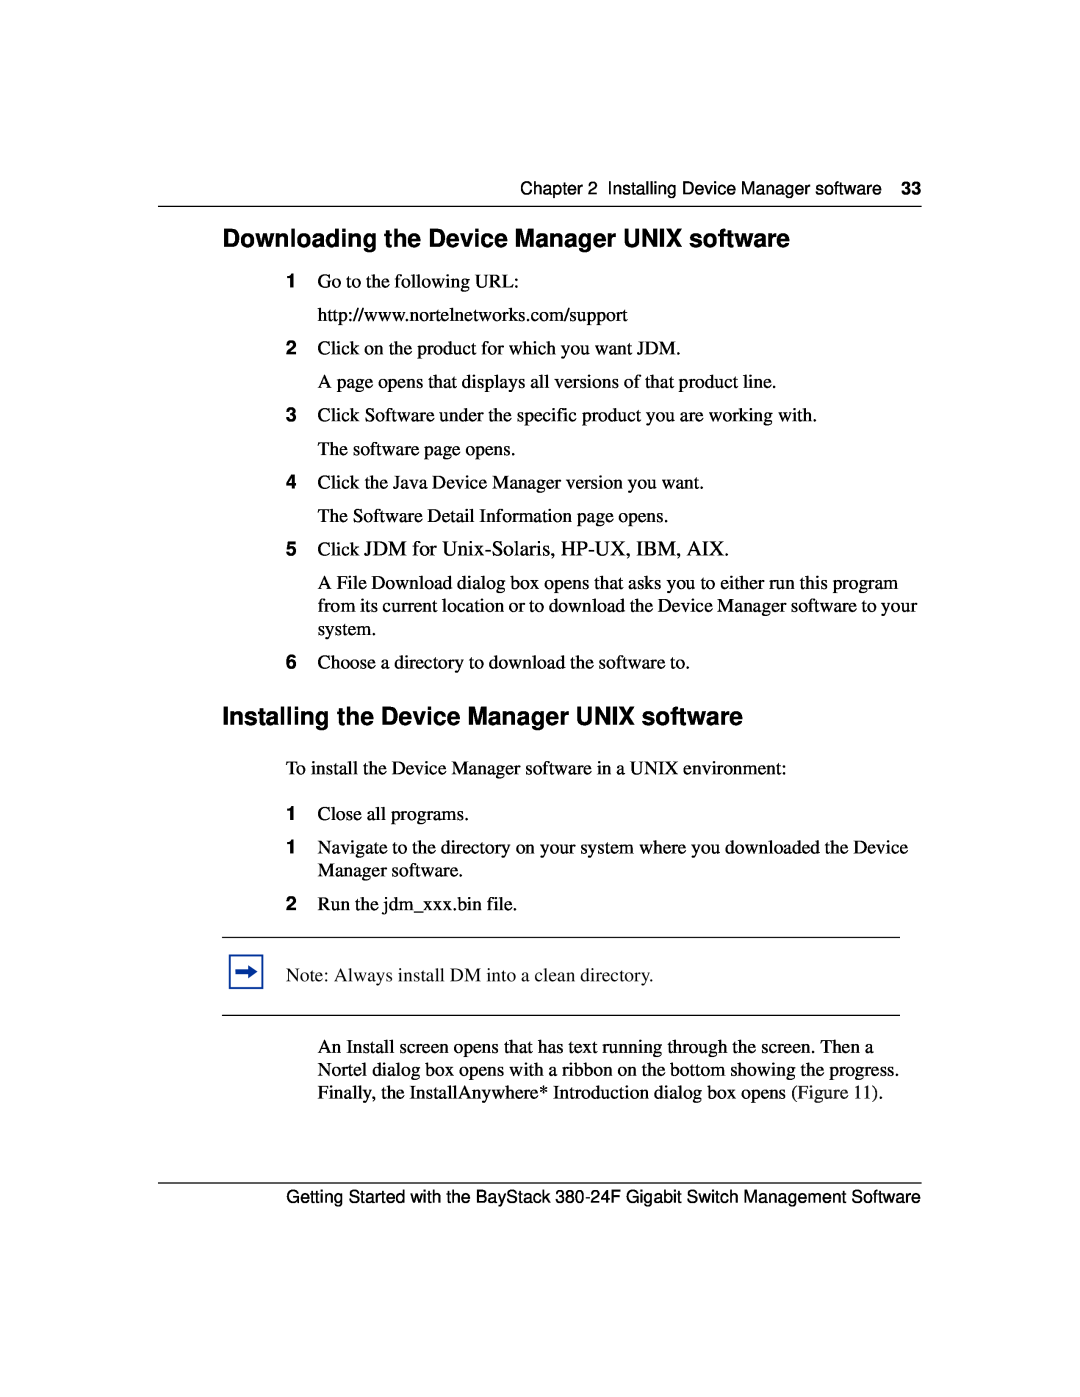 Nortel Networks 380-24F manual Downloading the Device Manager UNIX software, Installing the Device Manager UNIX software 